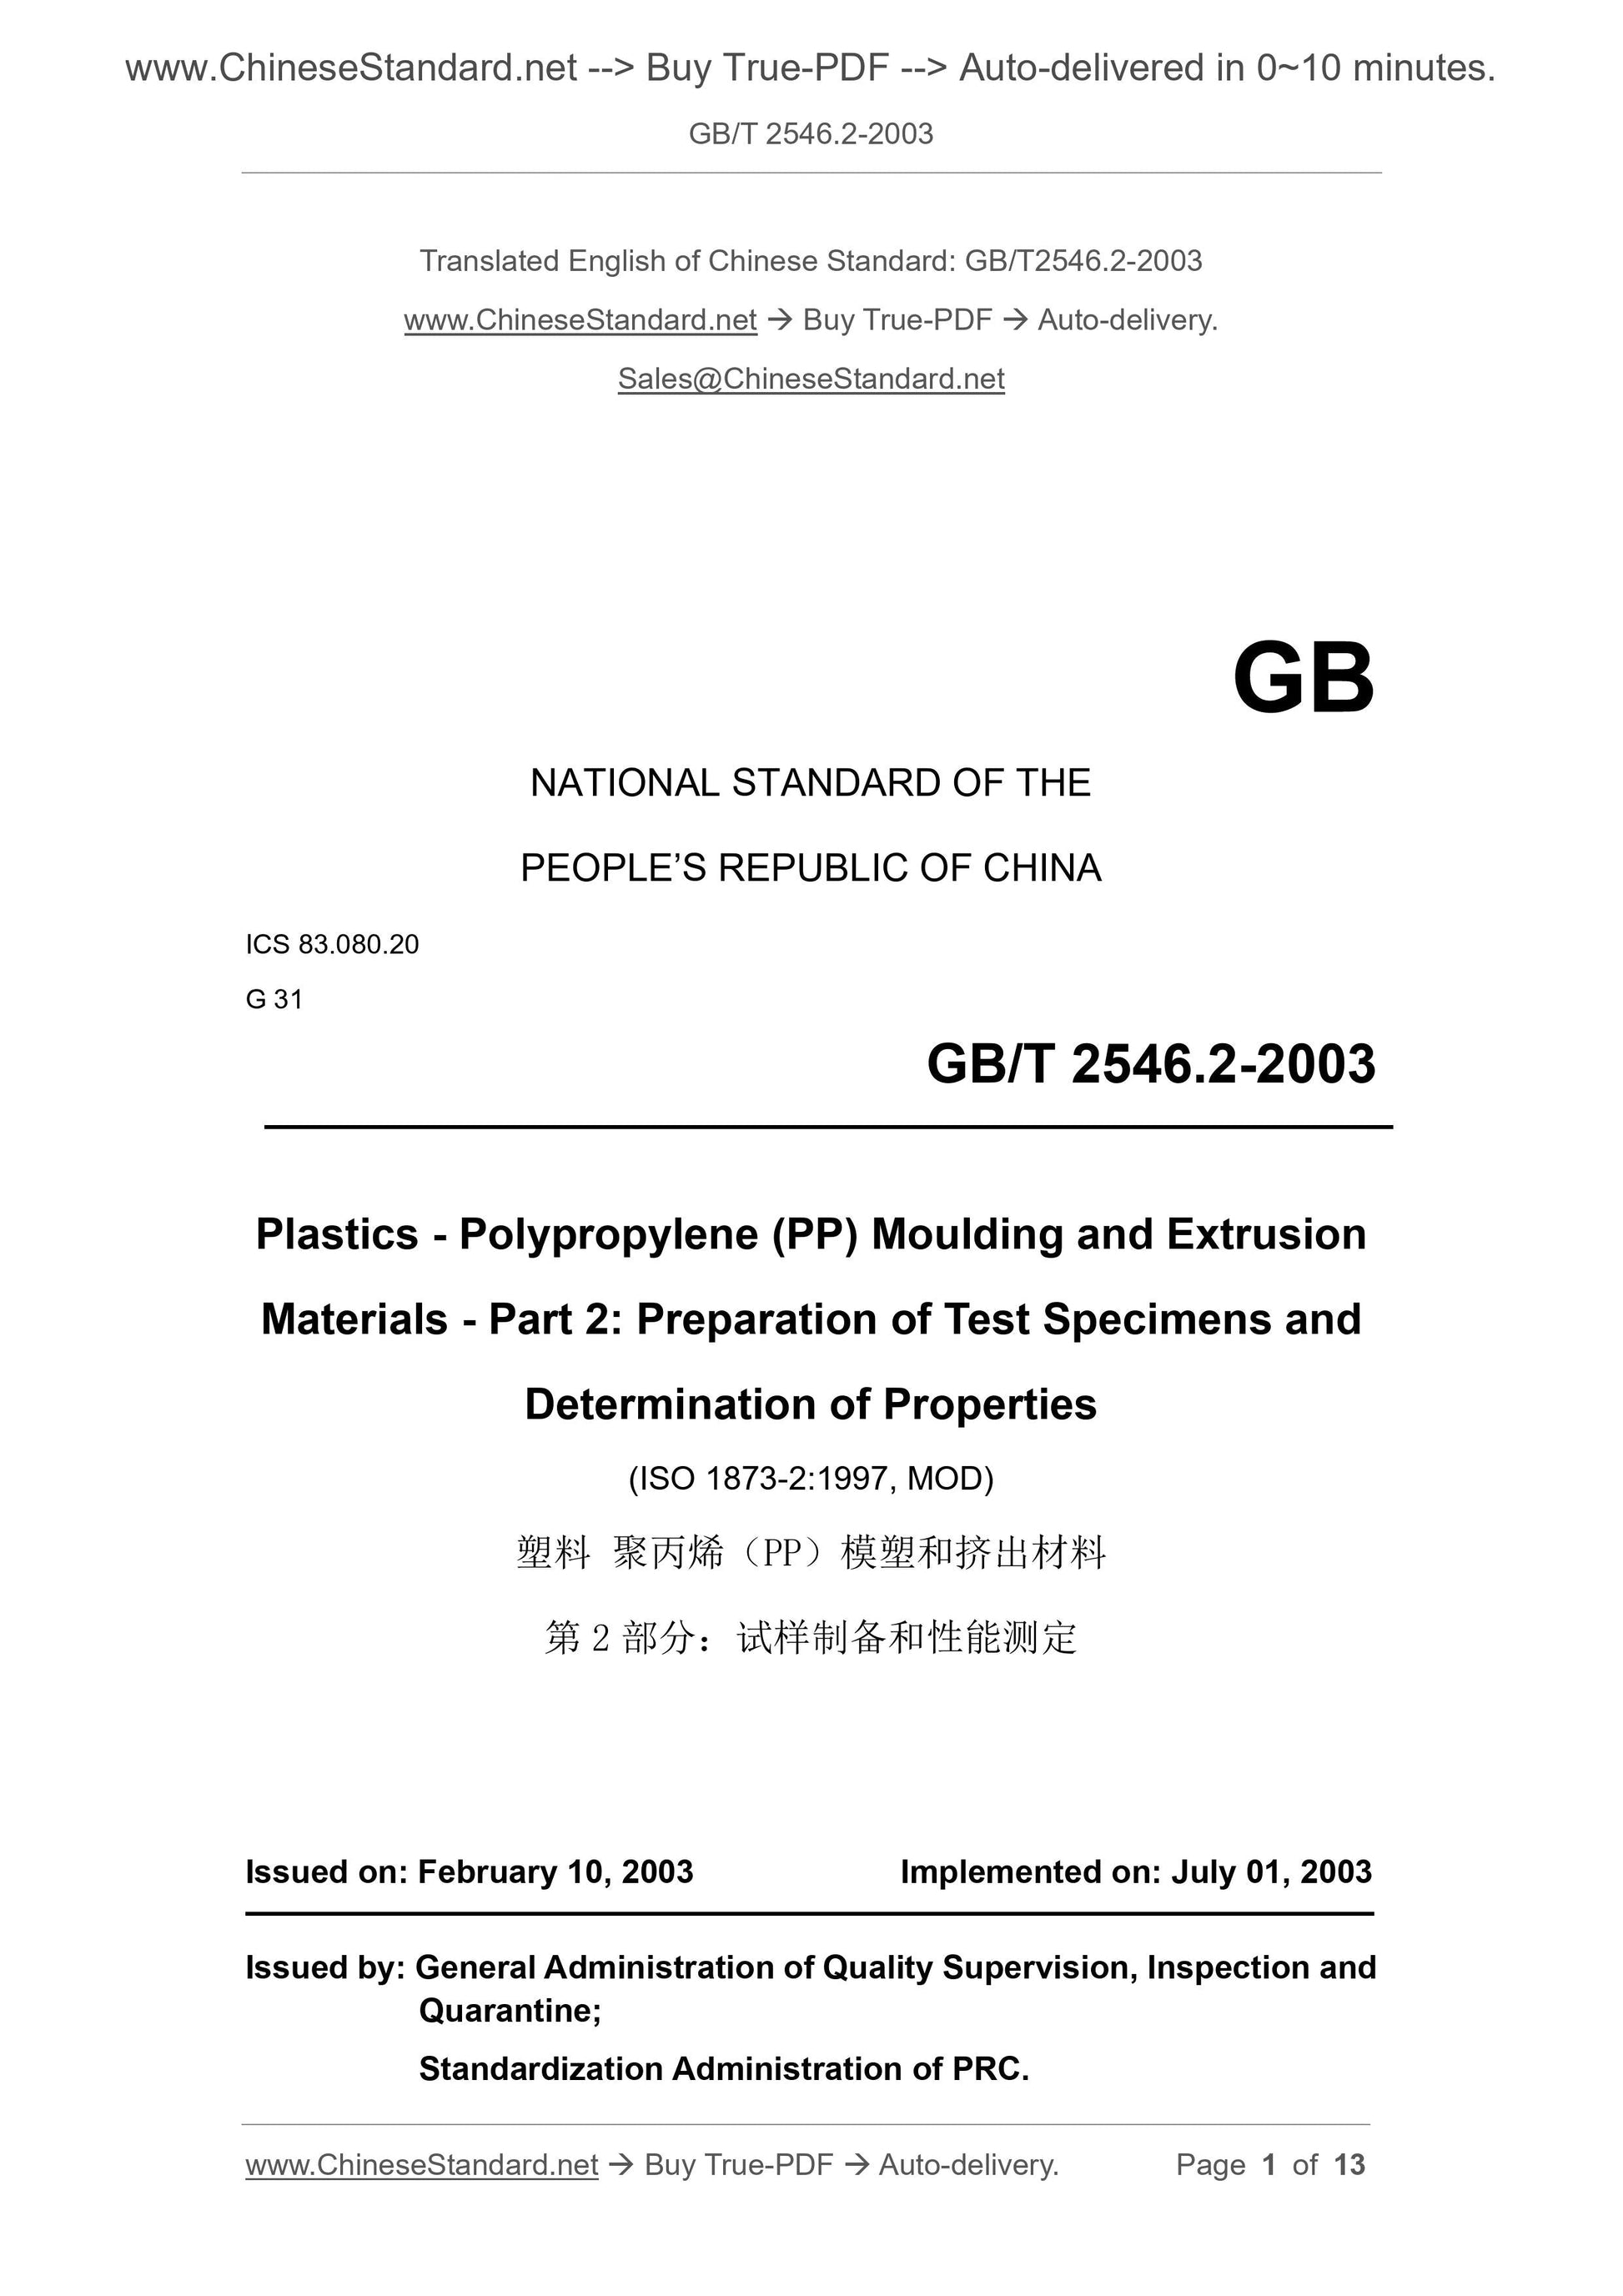 GB/T 2546.2-2003 Page 1